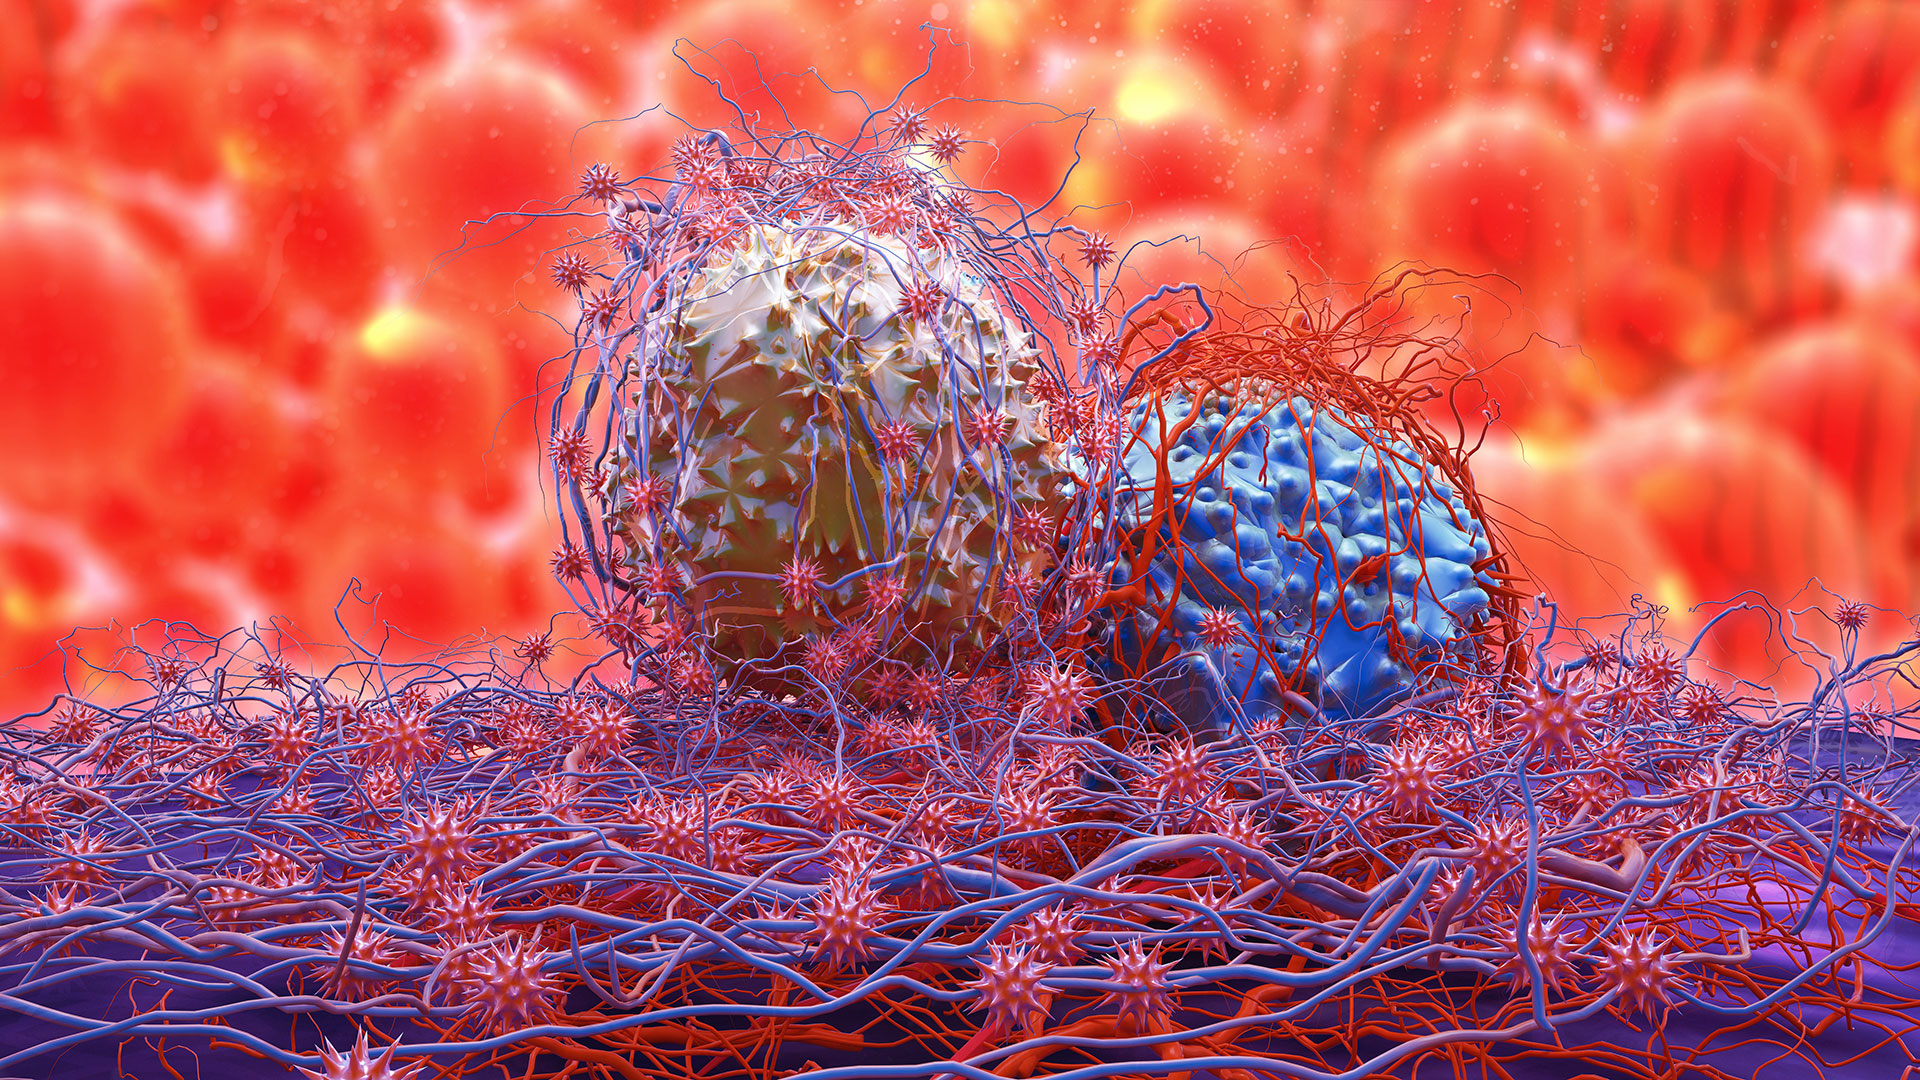 Preventing Proliferative Cancer Cells from Awakening